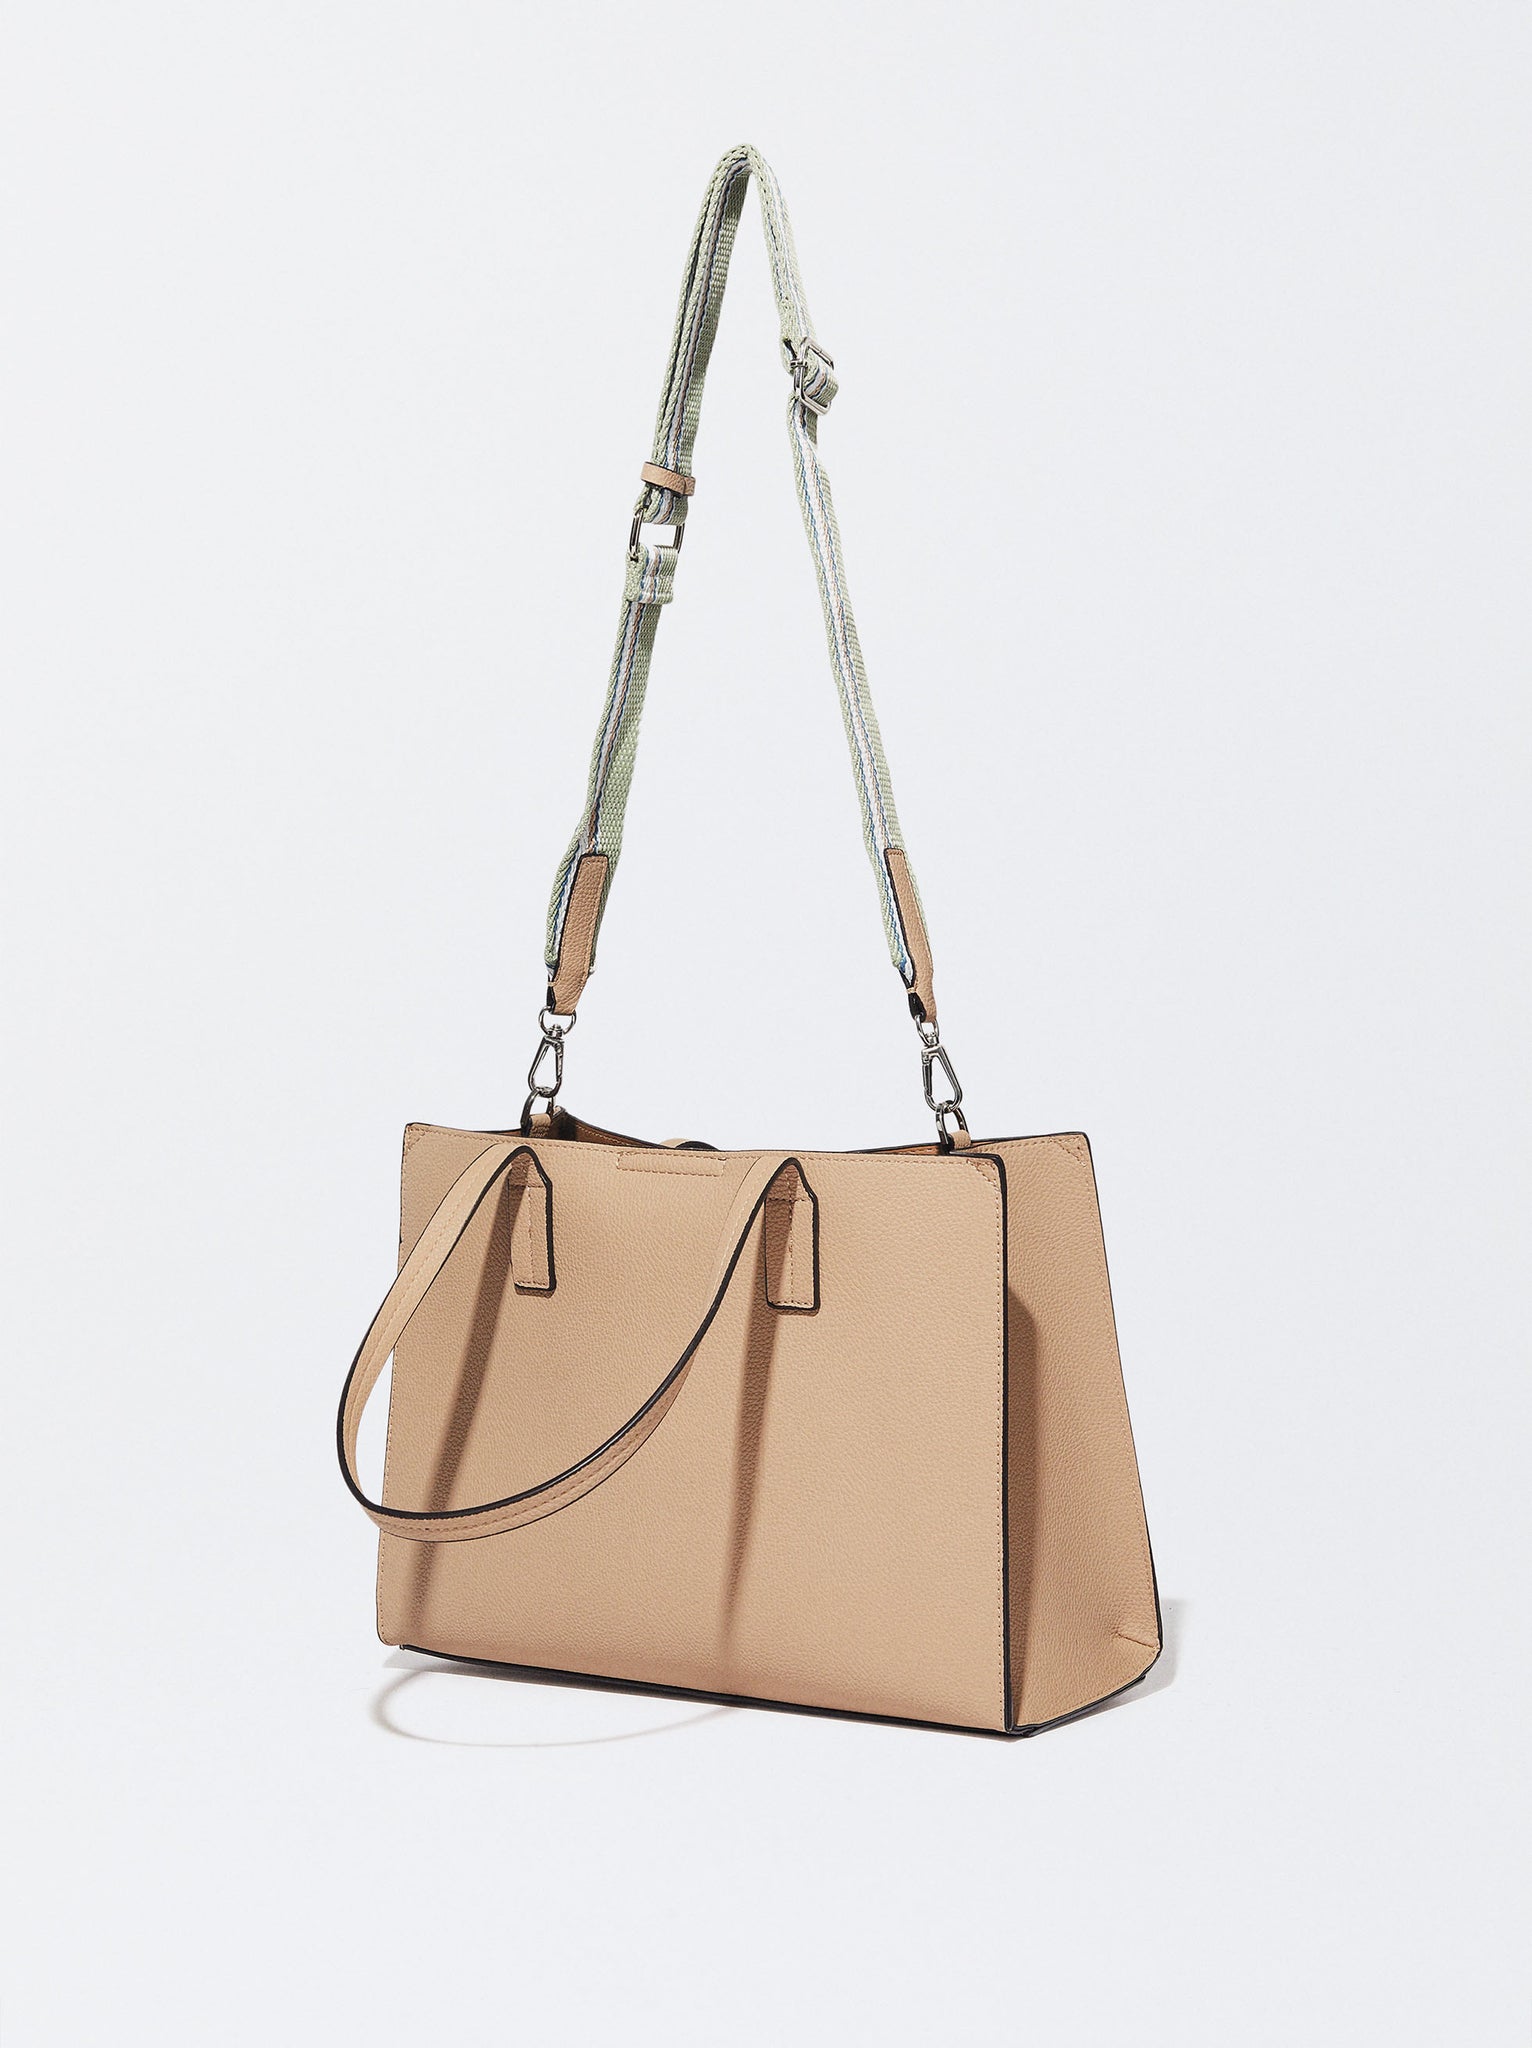 Tote Bag With Removable Interior